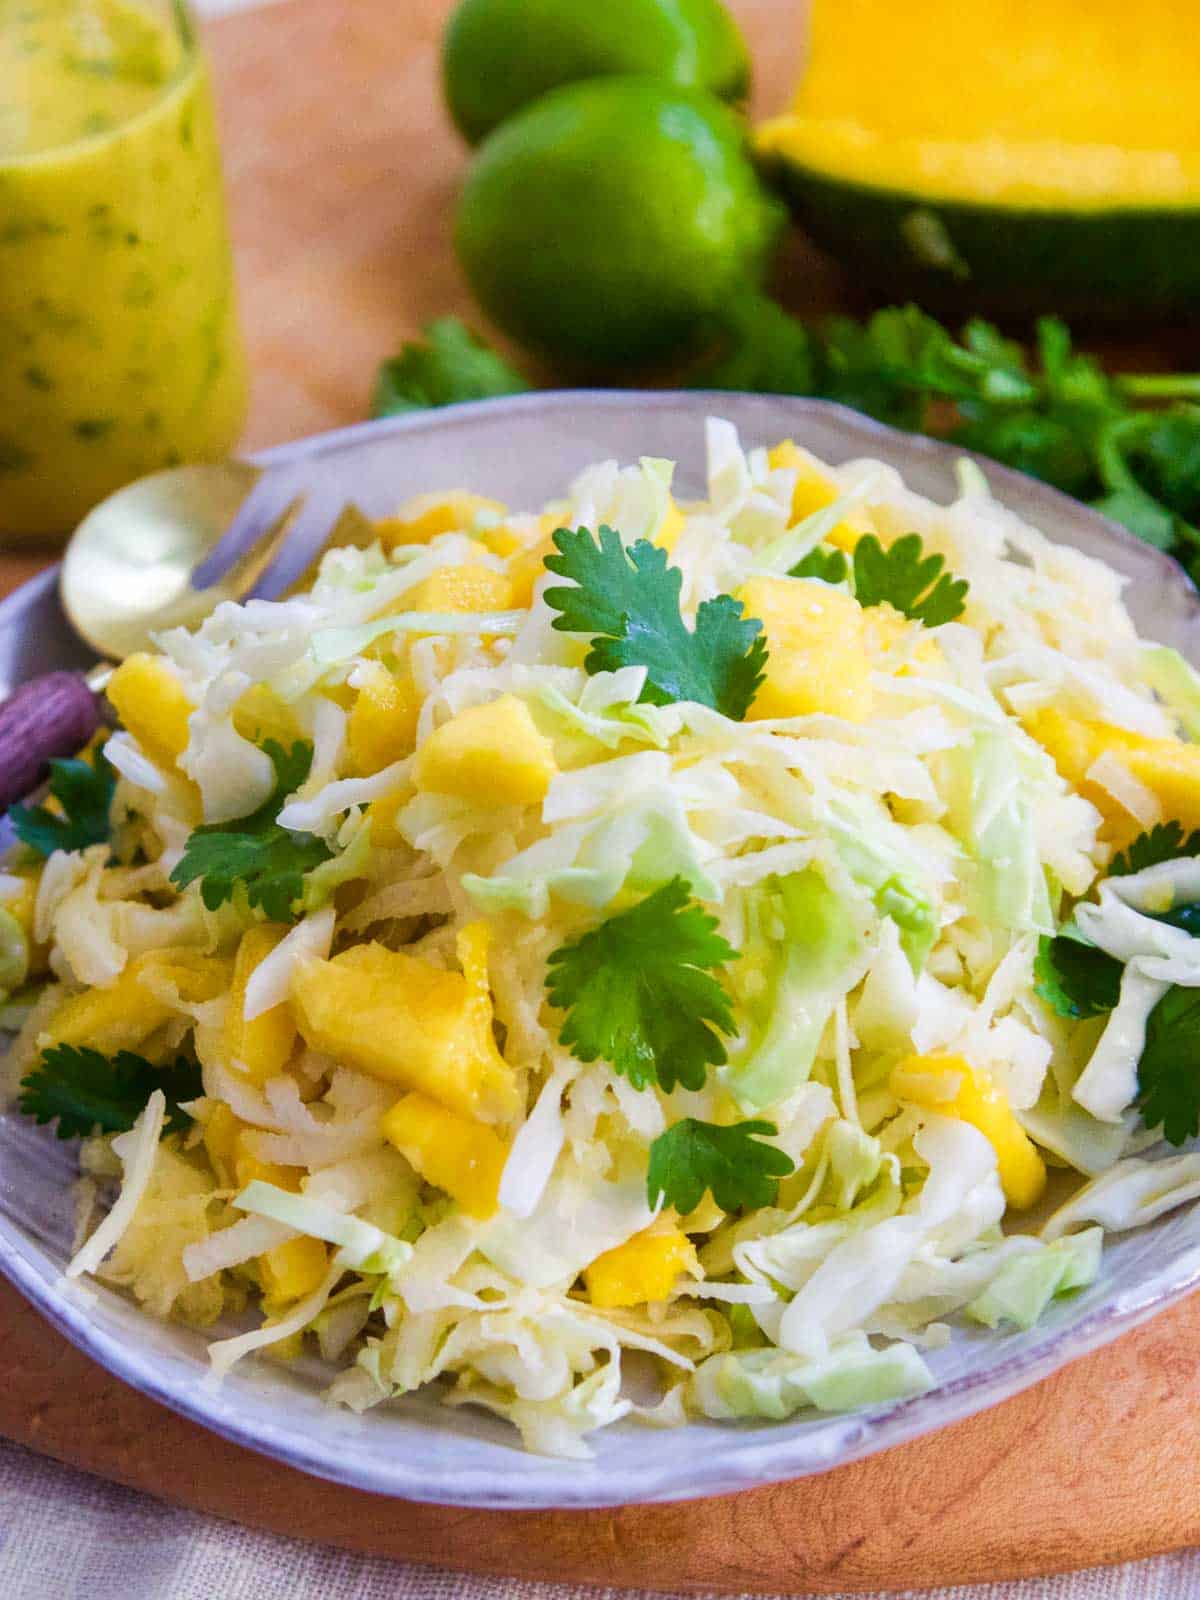 Mango slaw piled on a plate with a glass jar of dressing and limes in the background.